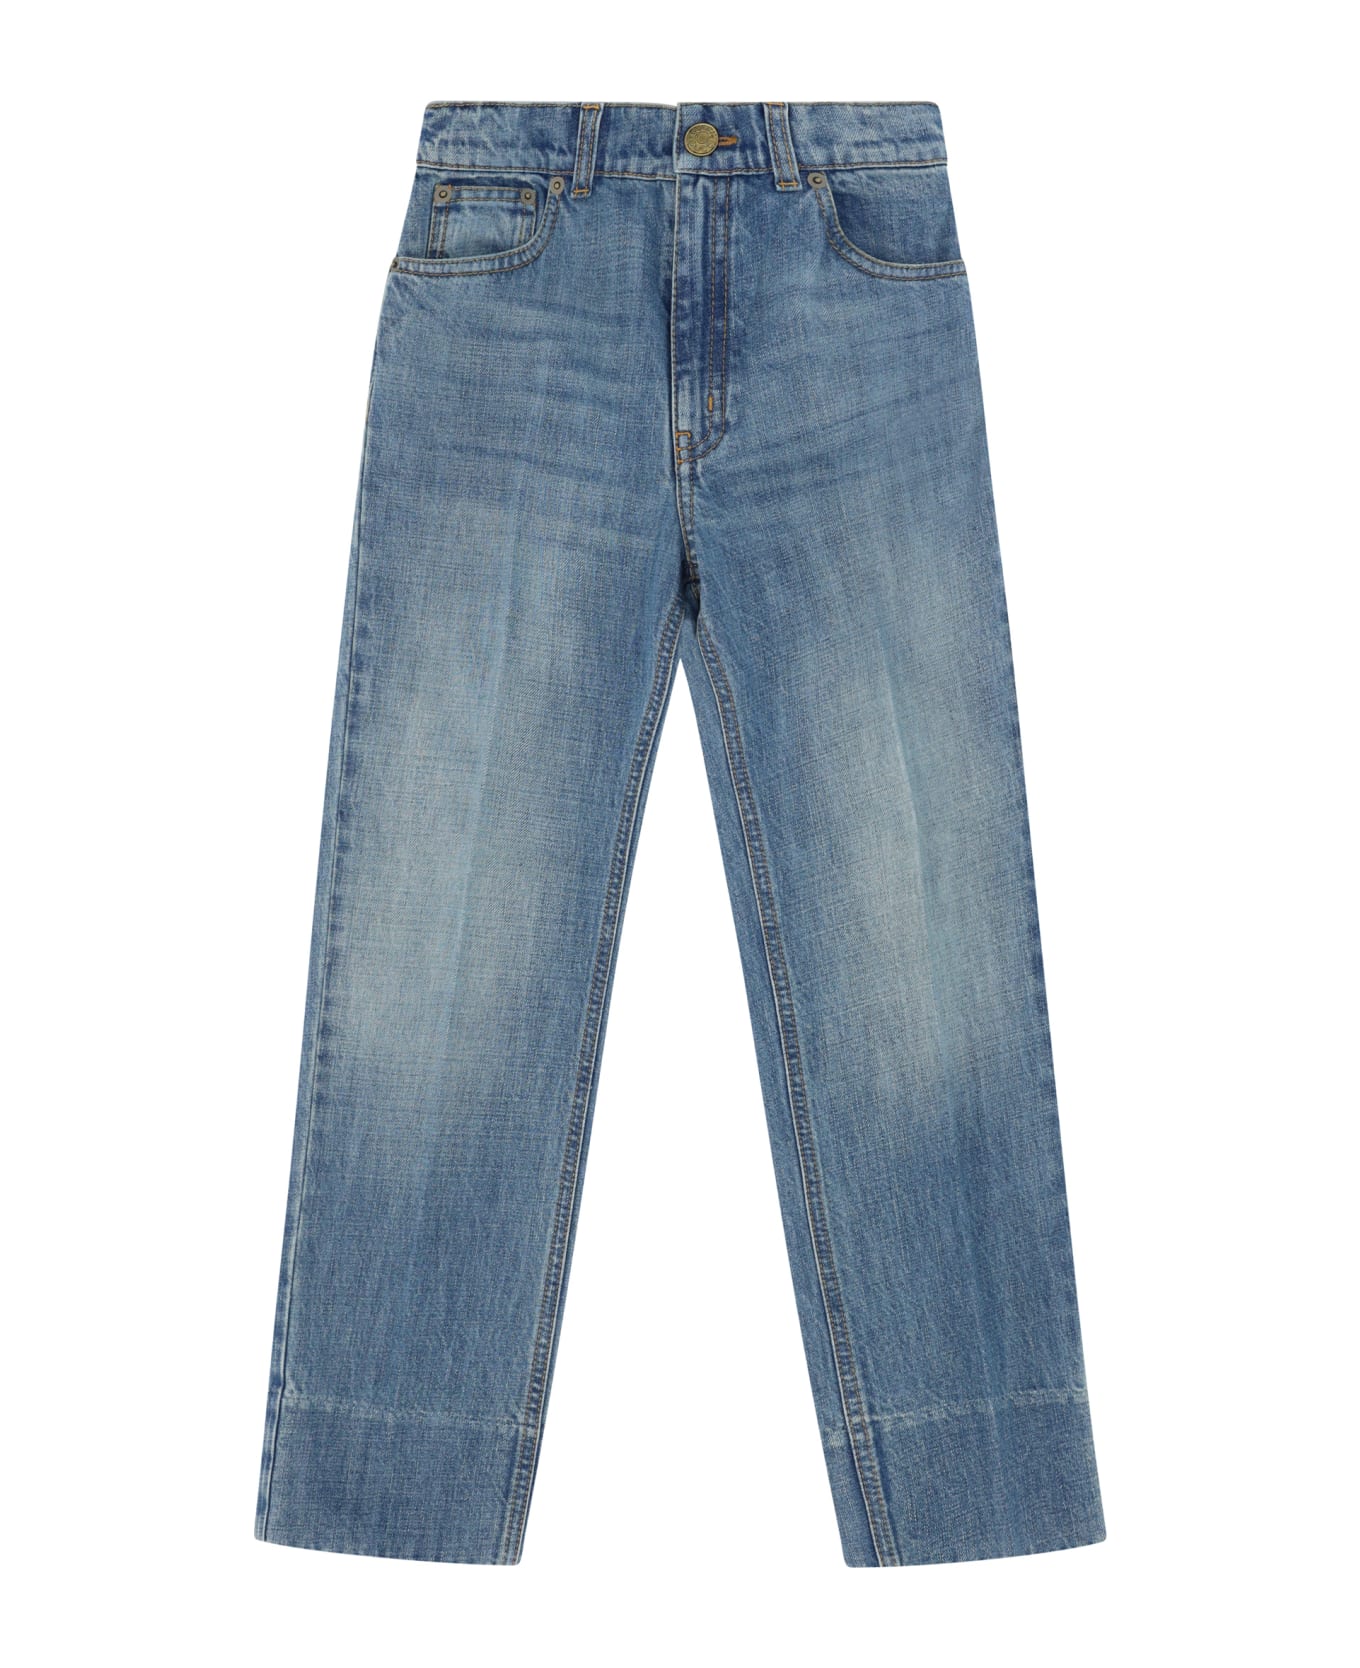 Gucci Jeans For Boy - Blu ボトムス